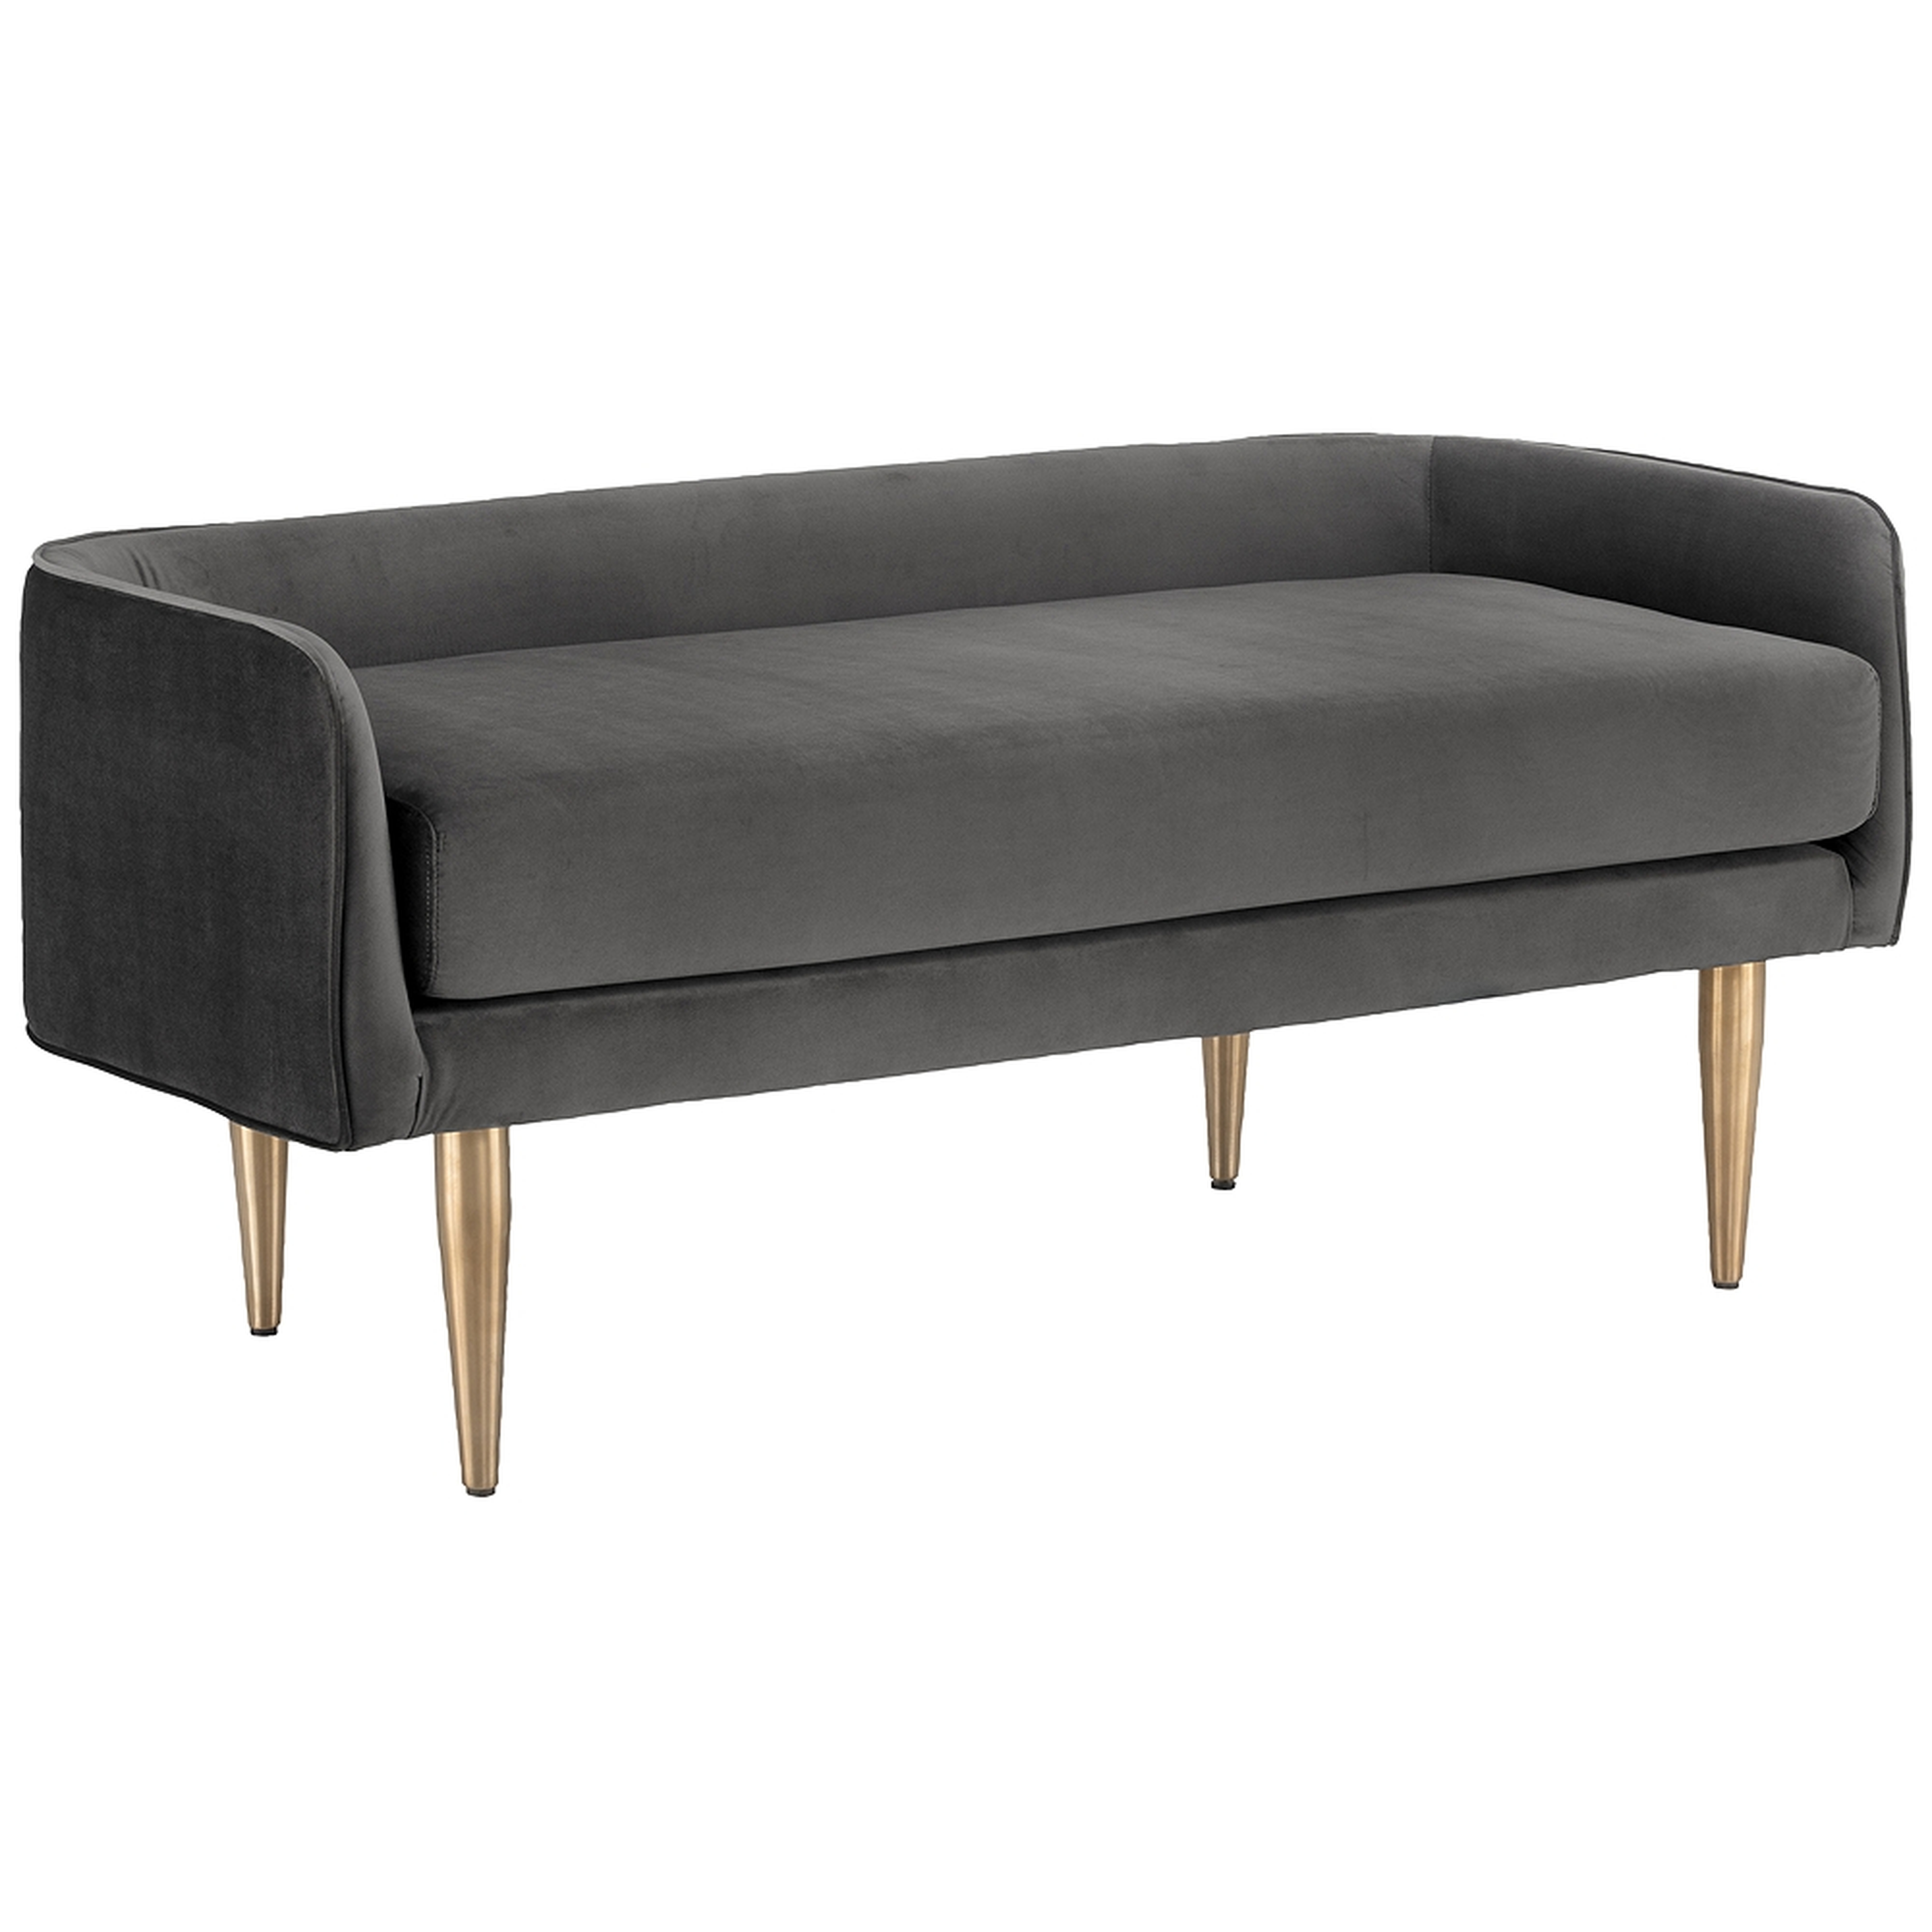 Sammy Gray Sky and Brushed Gold Bench - Style # 78J31 - Lamps Plus